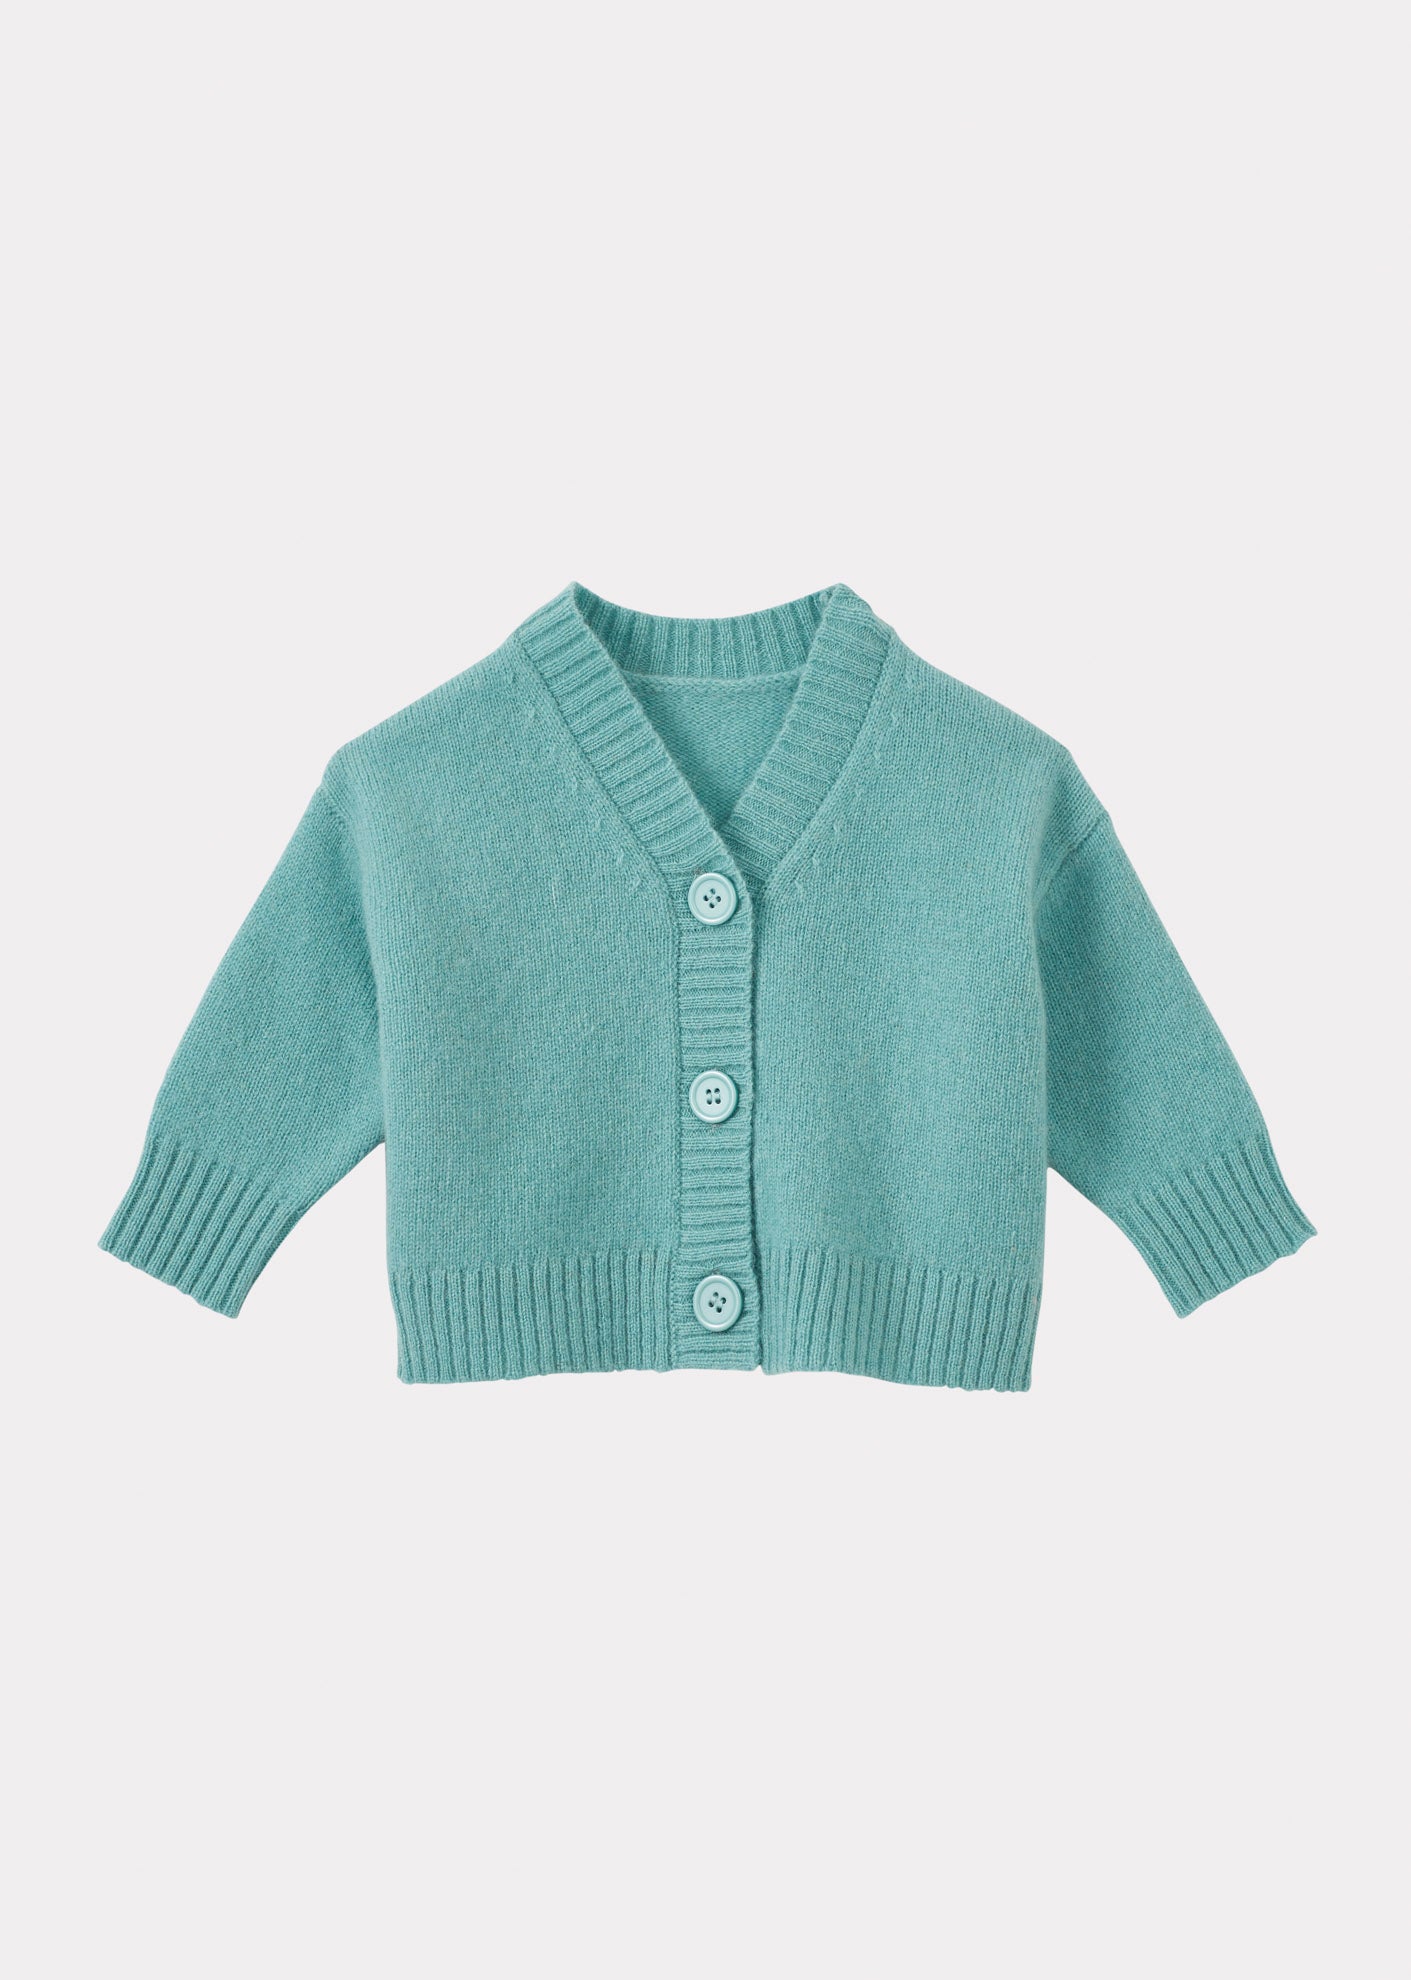 COPPER PARTY BABY CARDIGAN - LAGOON